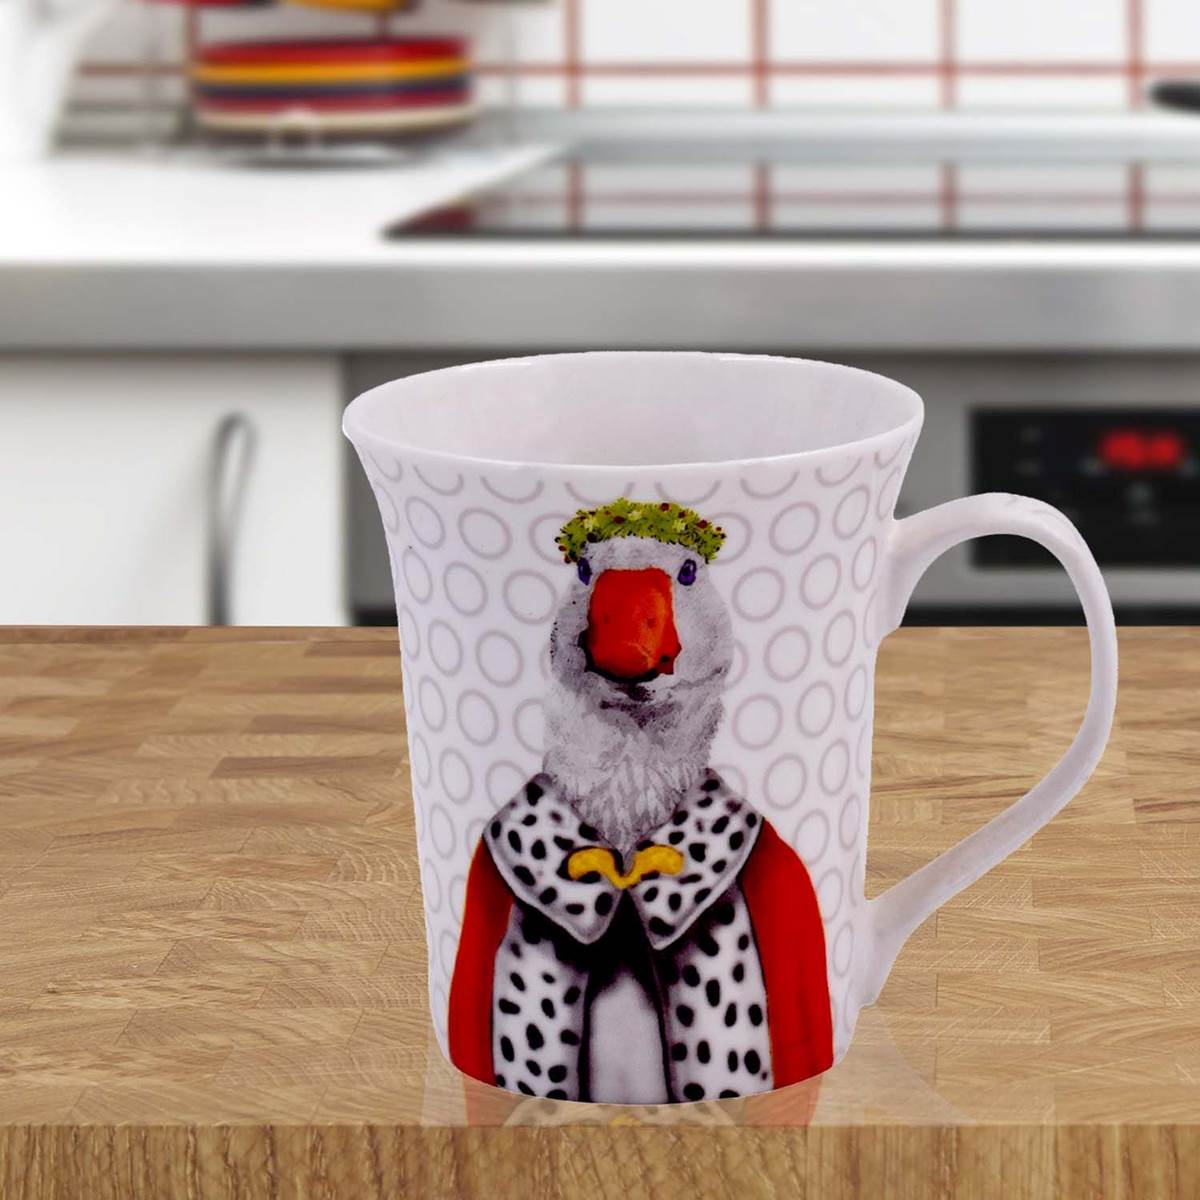 Kookee Printed Ceramic Tall Coffee or Tea Mug with handle for Office, Home or Gifting - 325ml (4019C-D)